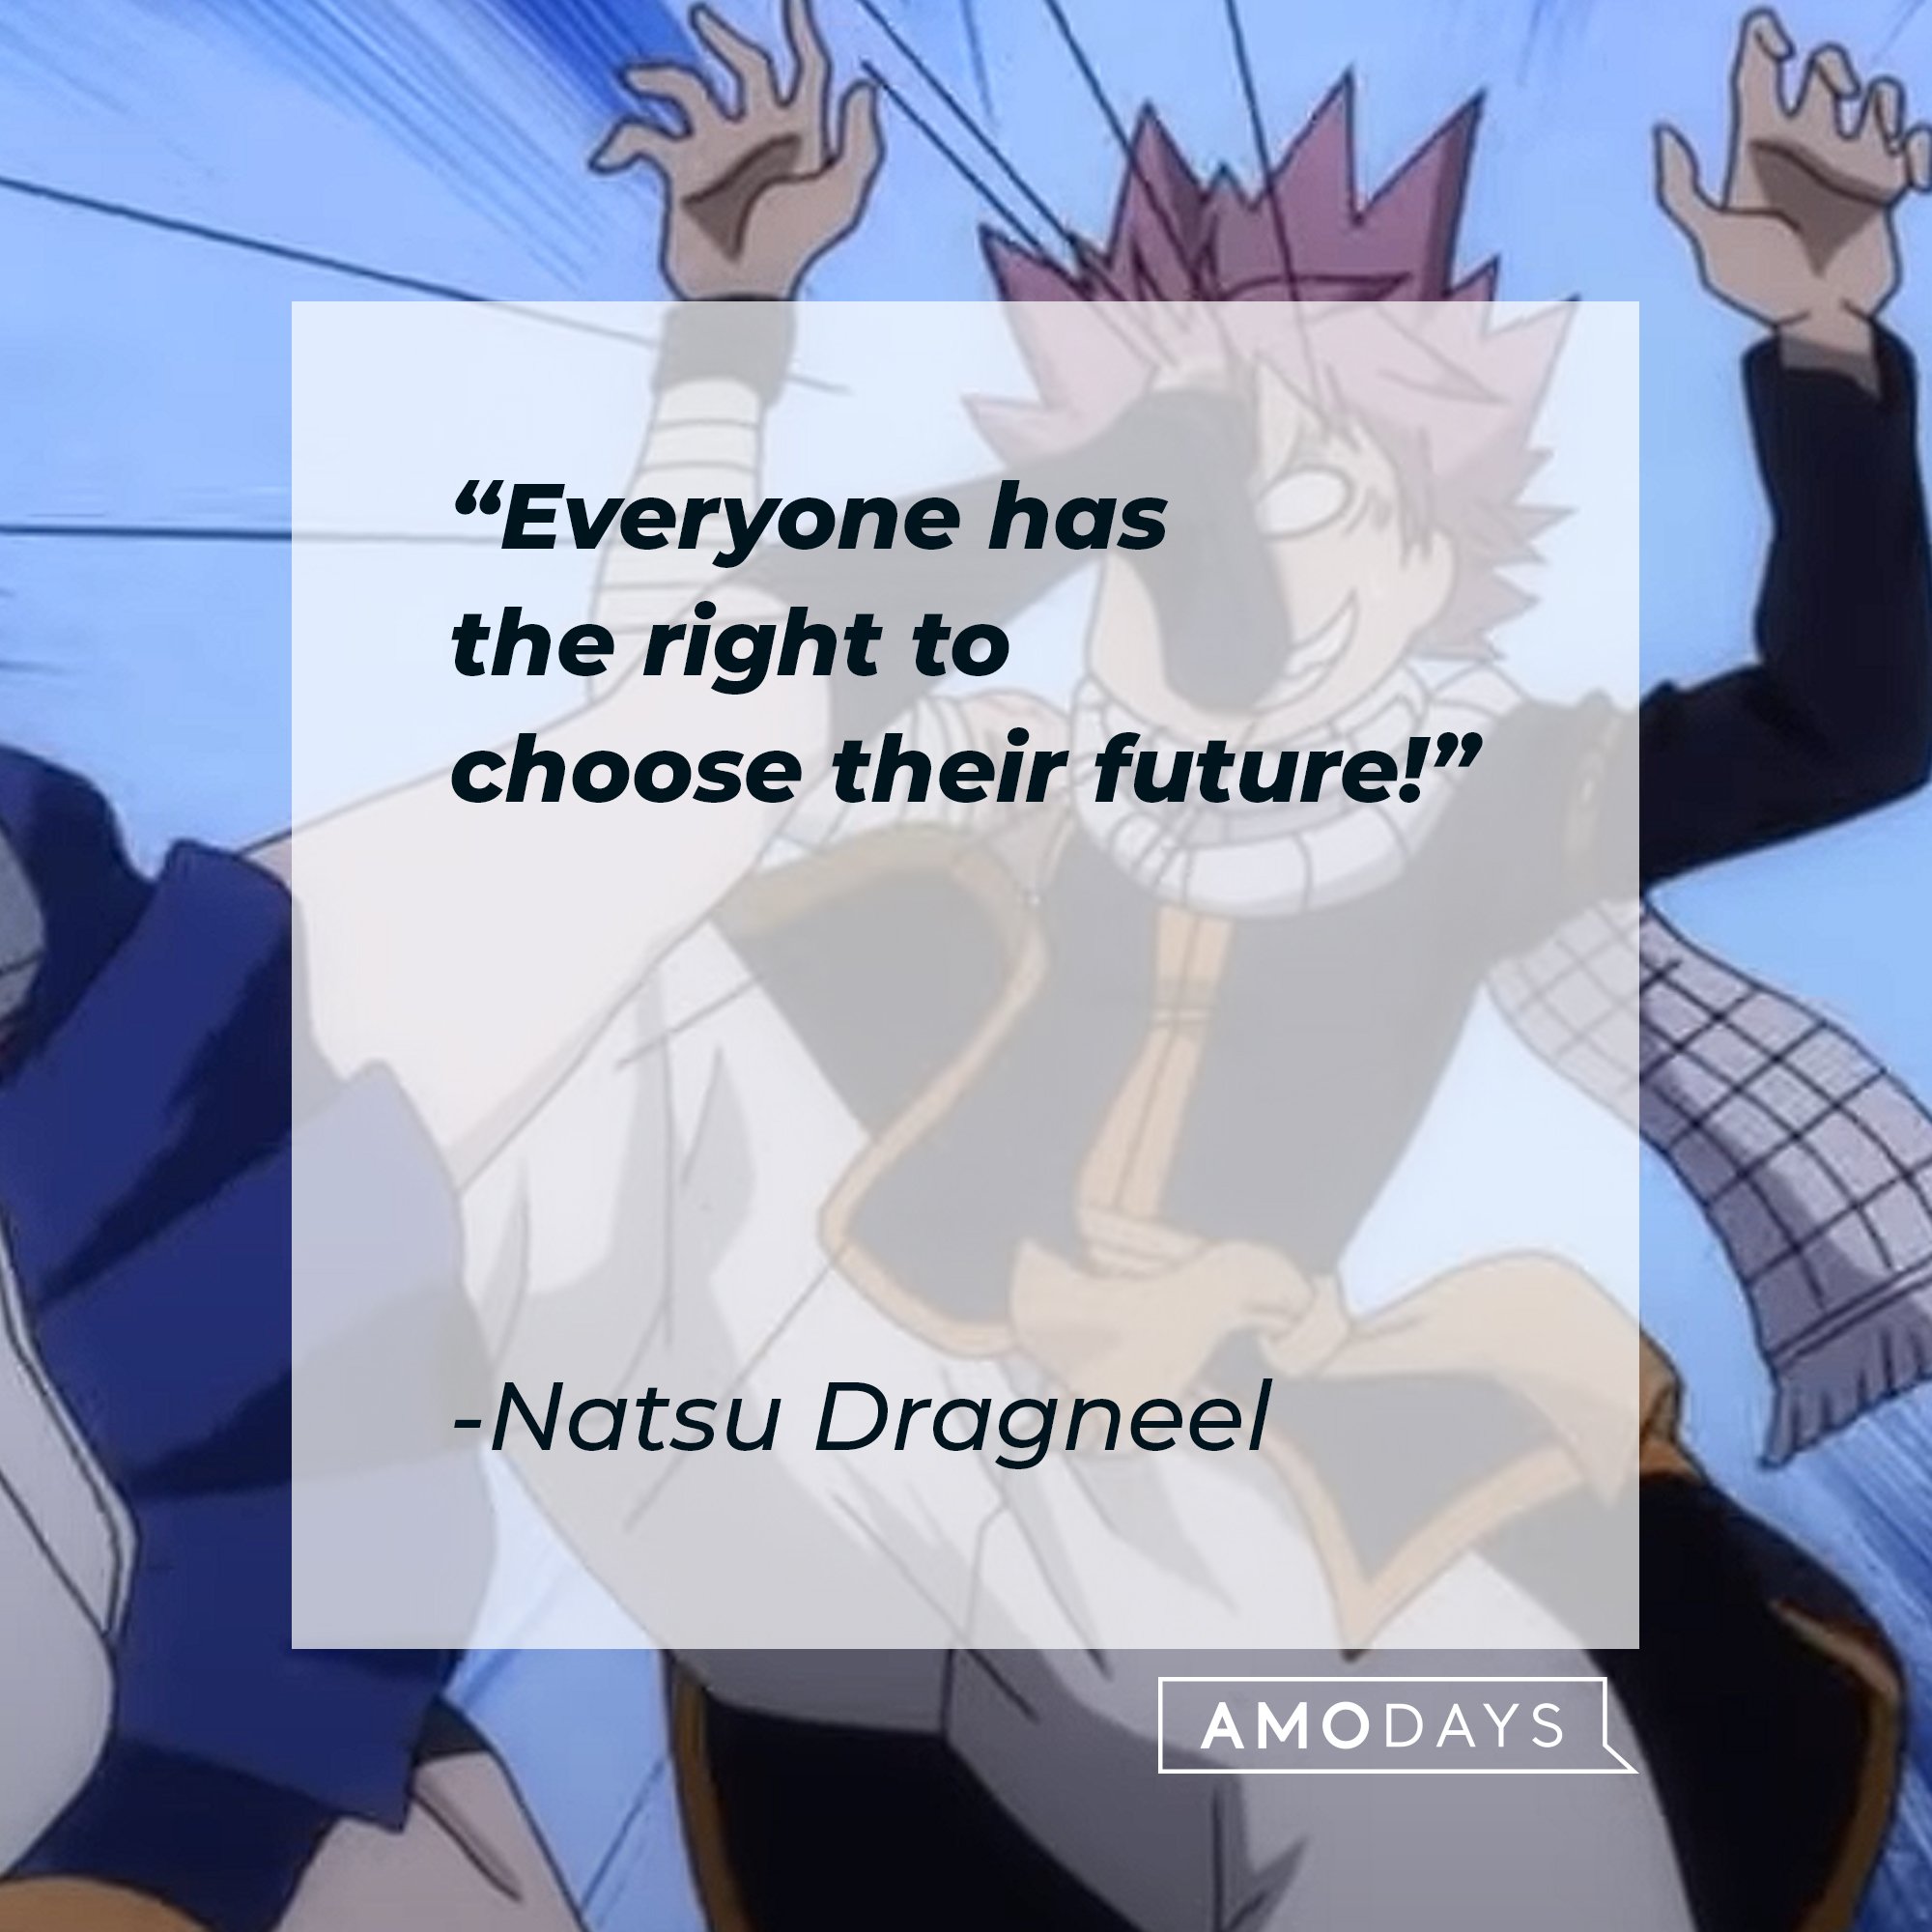 Natsu Dragneel’s quote: "Everyone has the right to choose their future!” | Image: AmoDays